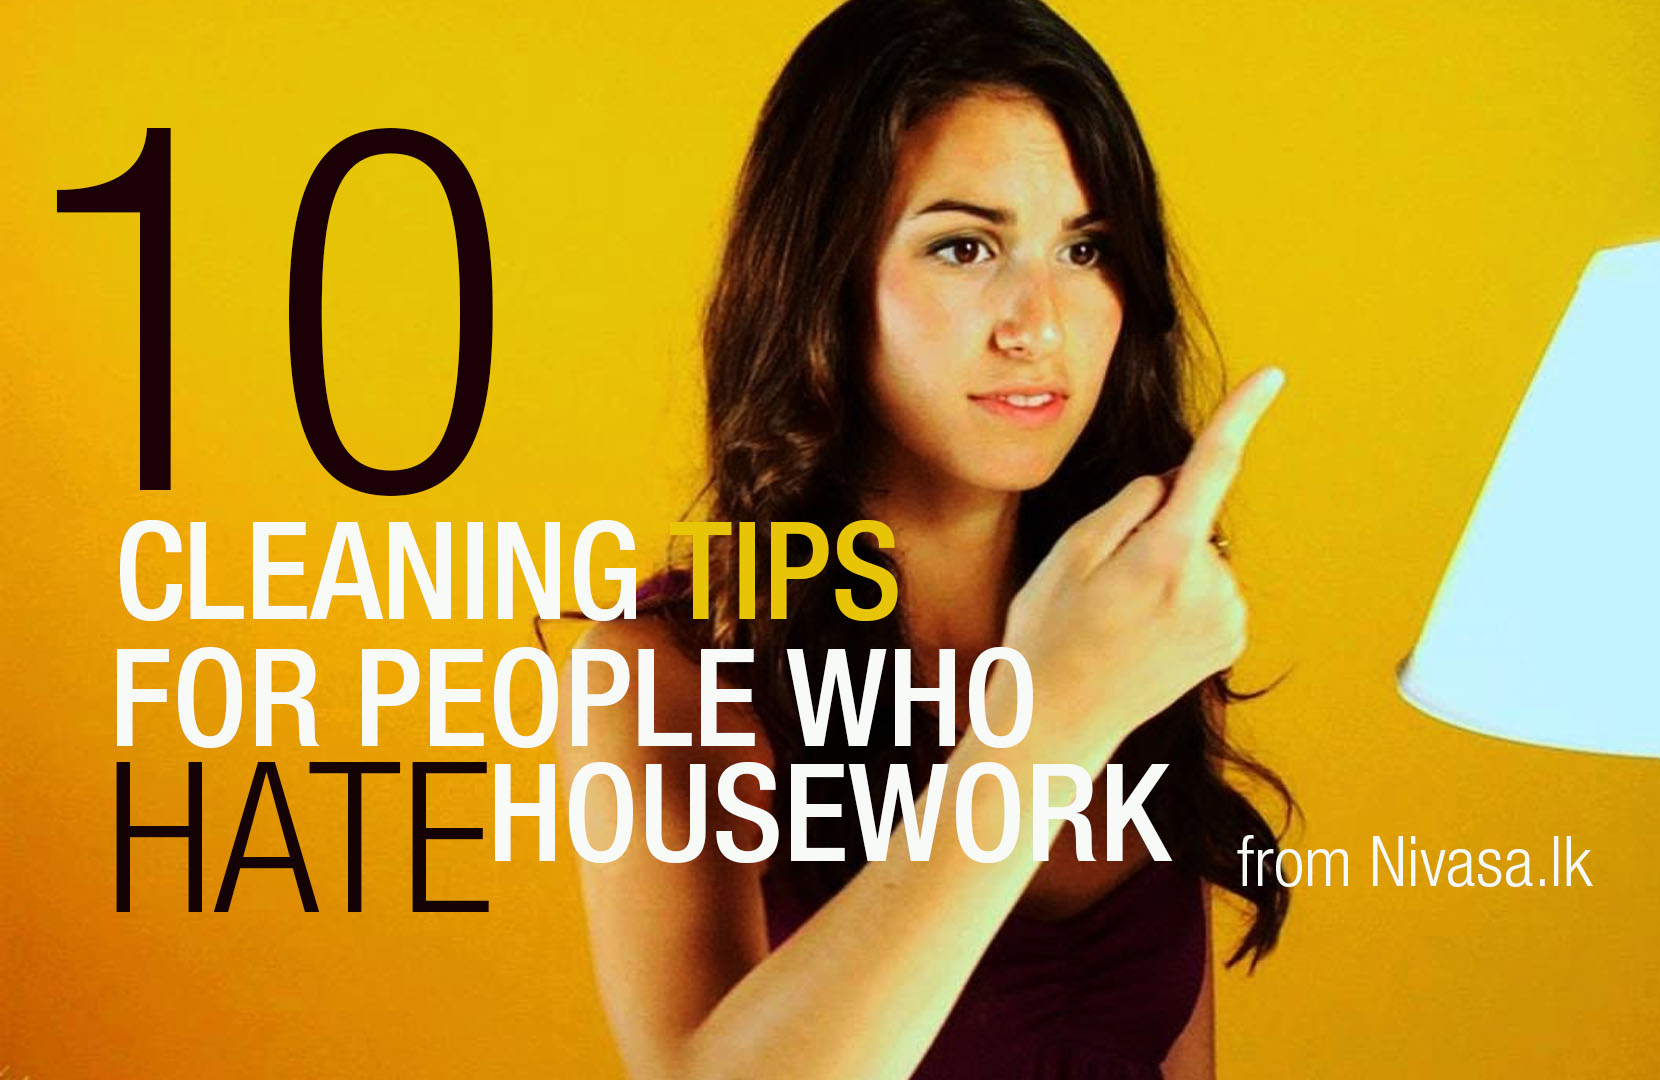 10 Cleaning Tips for People who Hate Housework